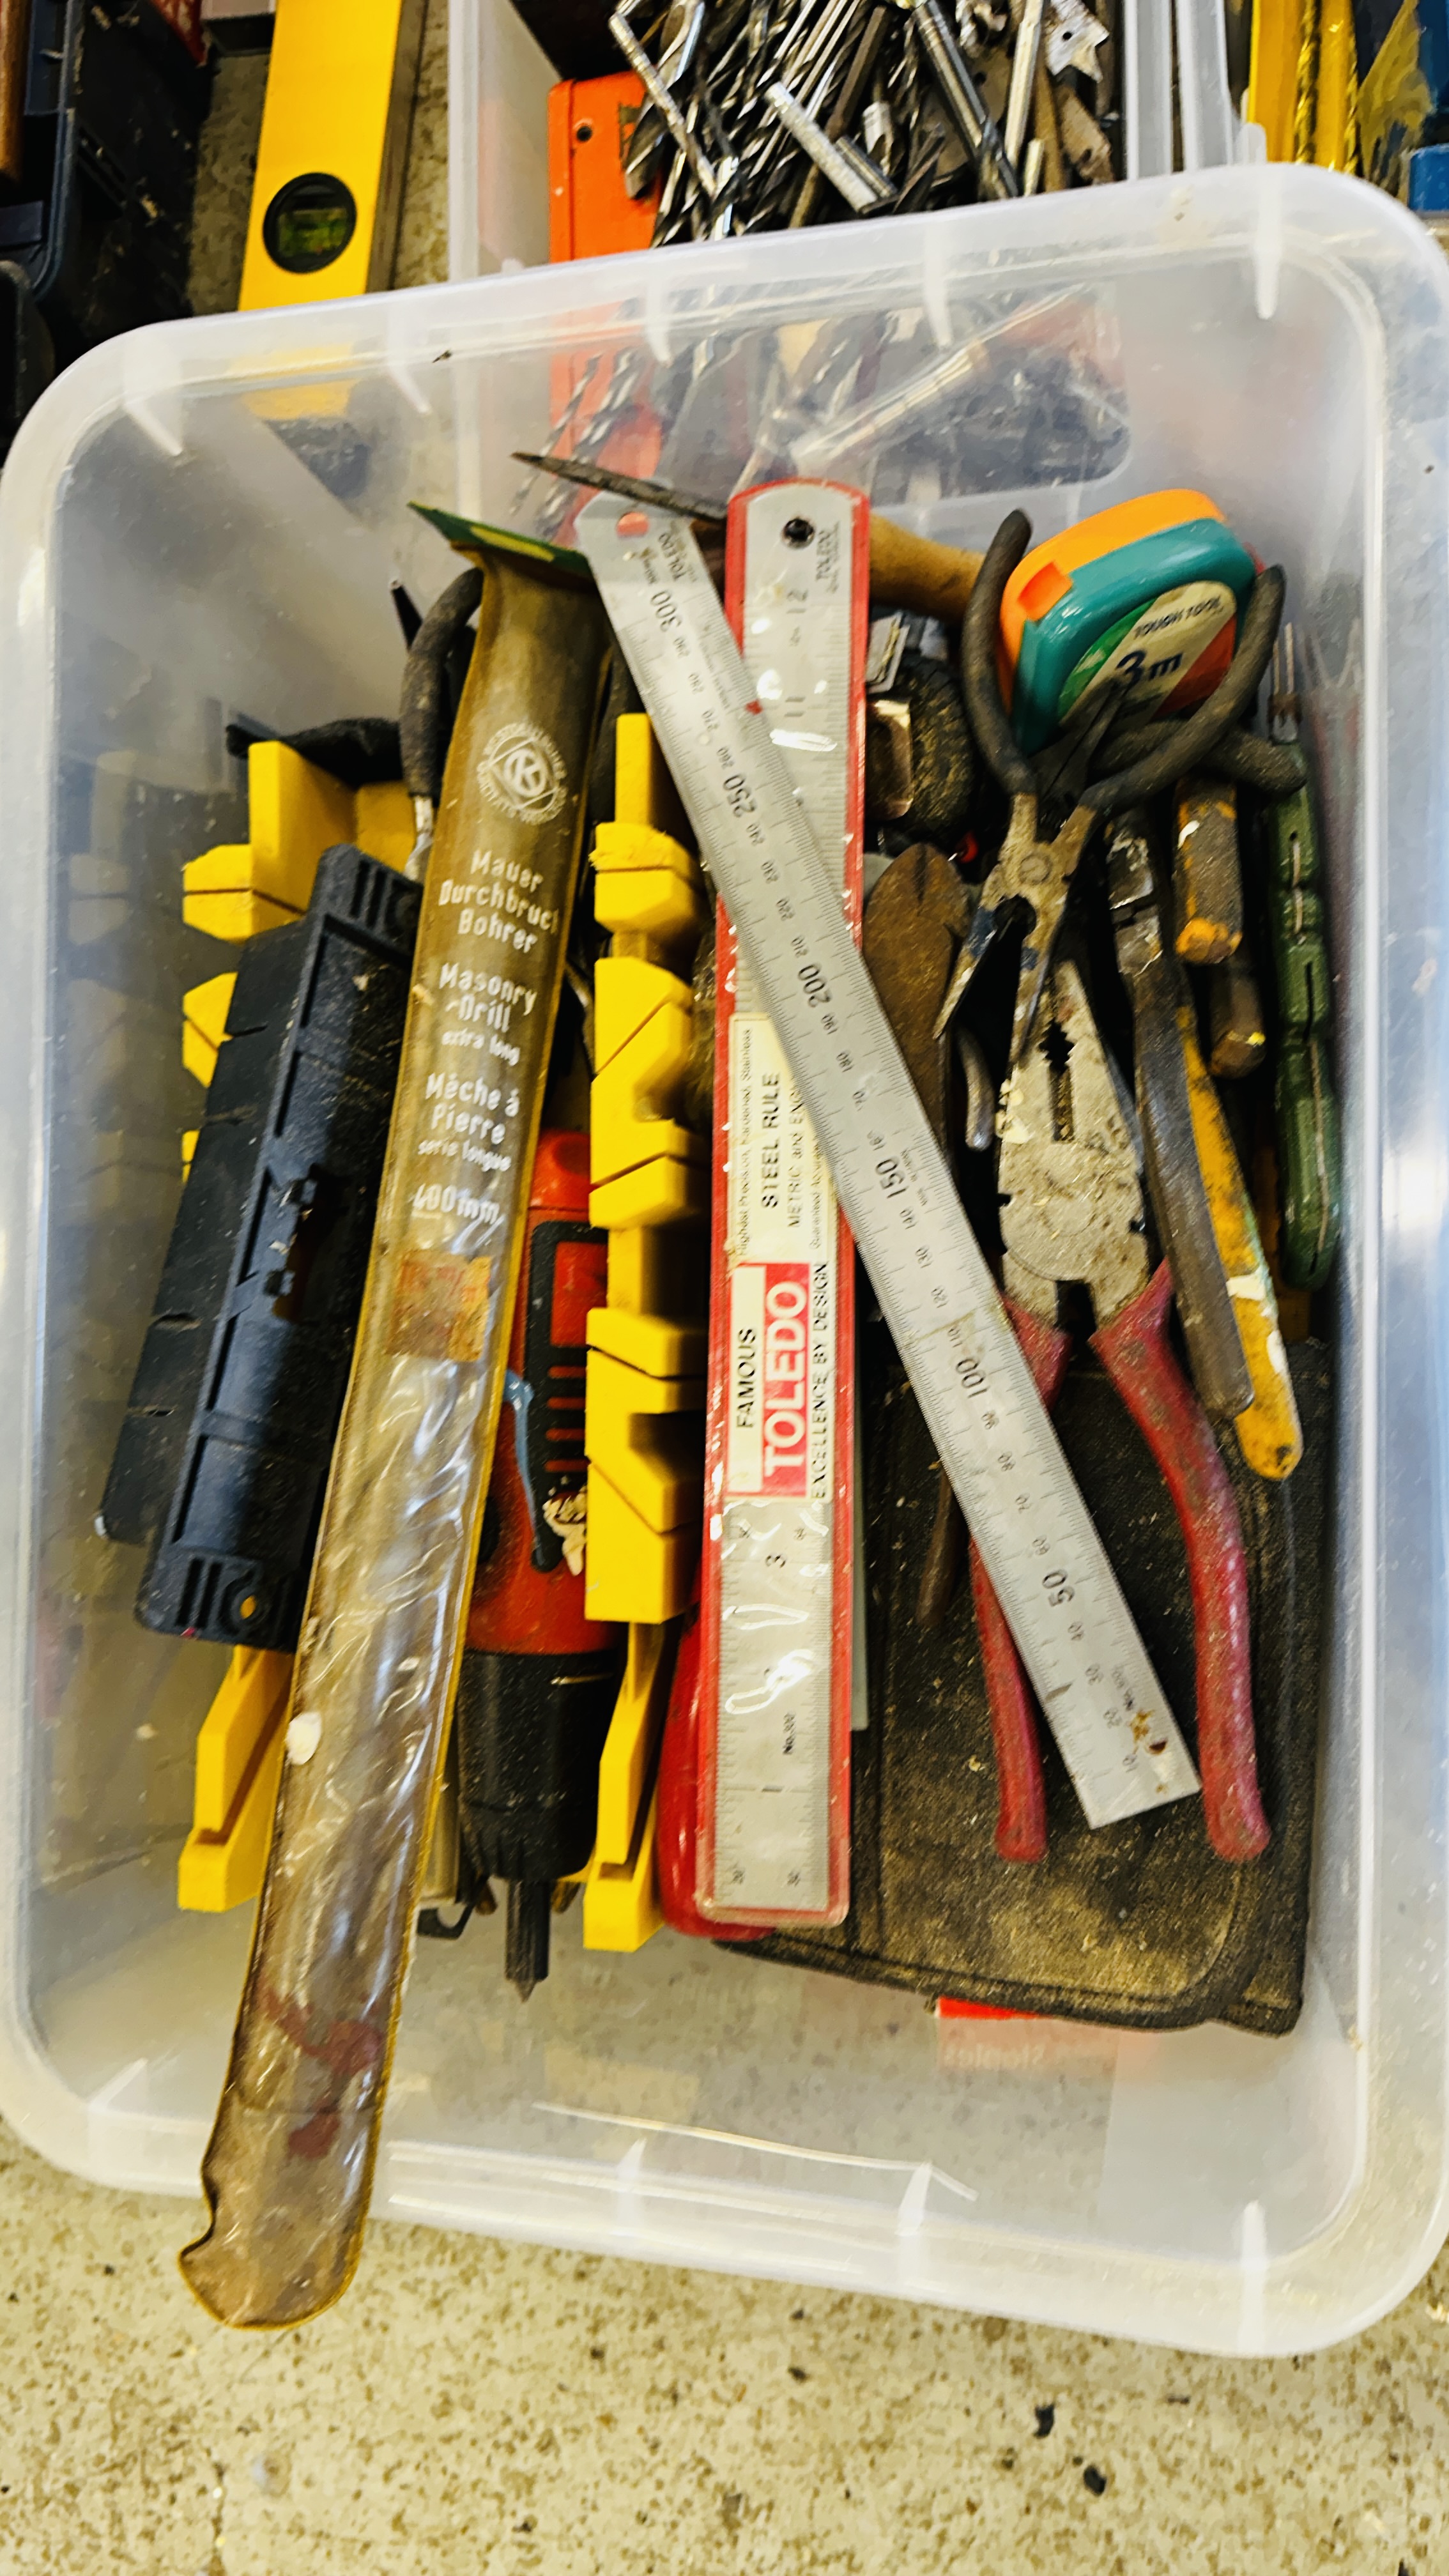 14 X BOXES CONTAINING ASSORTED HAND TOOLS TO INCLUDE SOCKETS, SCREWDRIVERS, FILES, MITRE SAW ETC. - Image 6 of 10